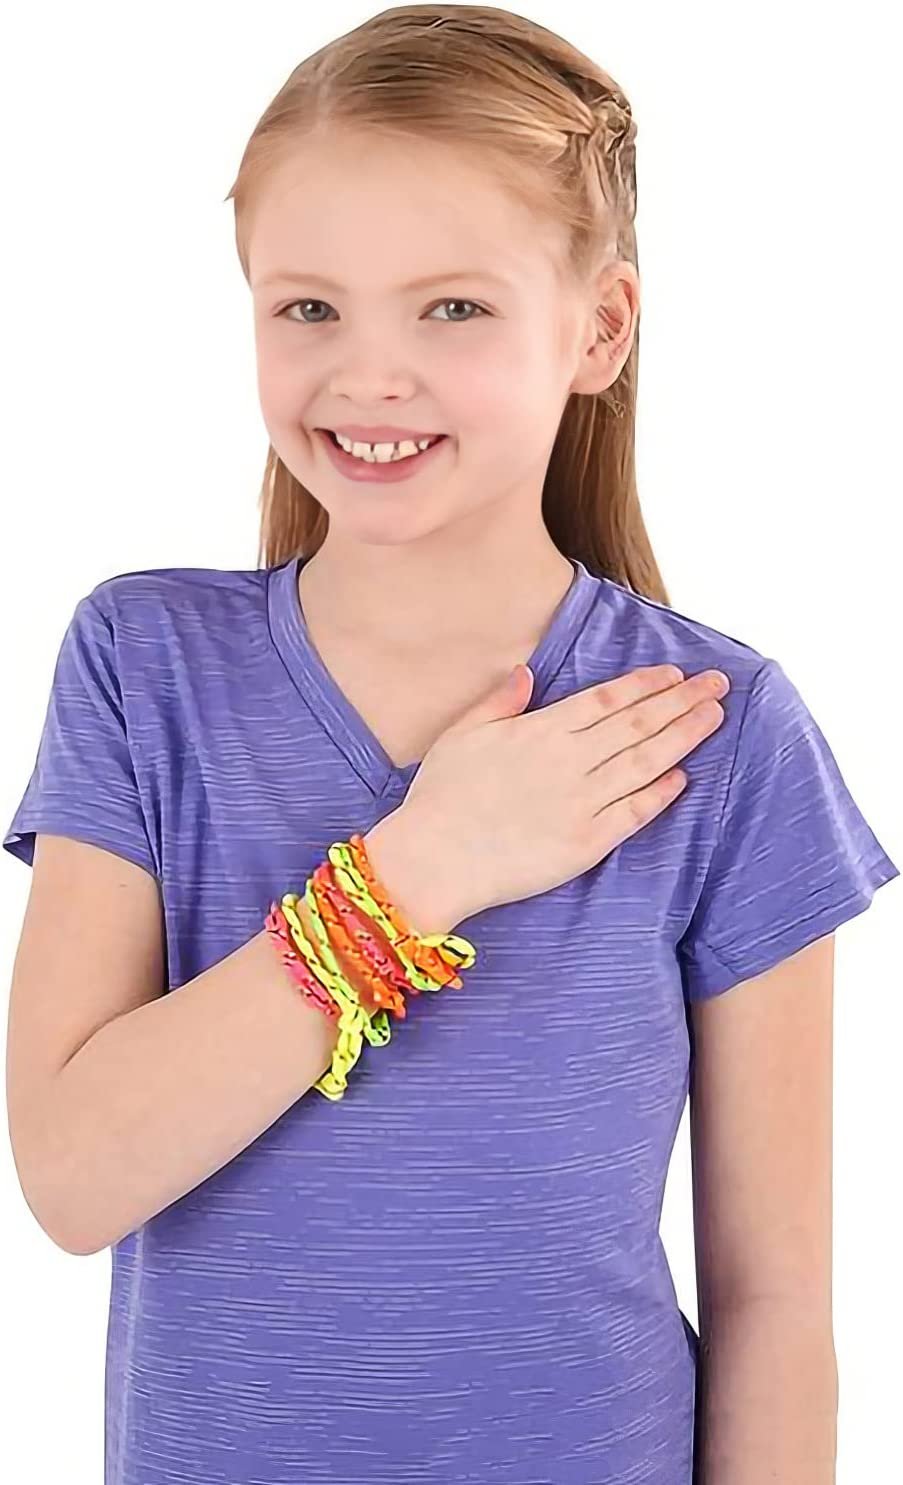 Rainbow Bracelets- Colorful Friendship Bracelet- Rainbow Loom Bracelets-  Party Favors- Birthday Gifts- For Him- For Her